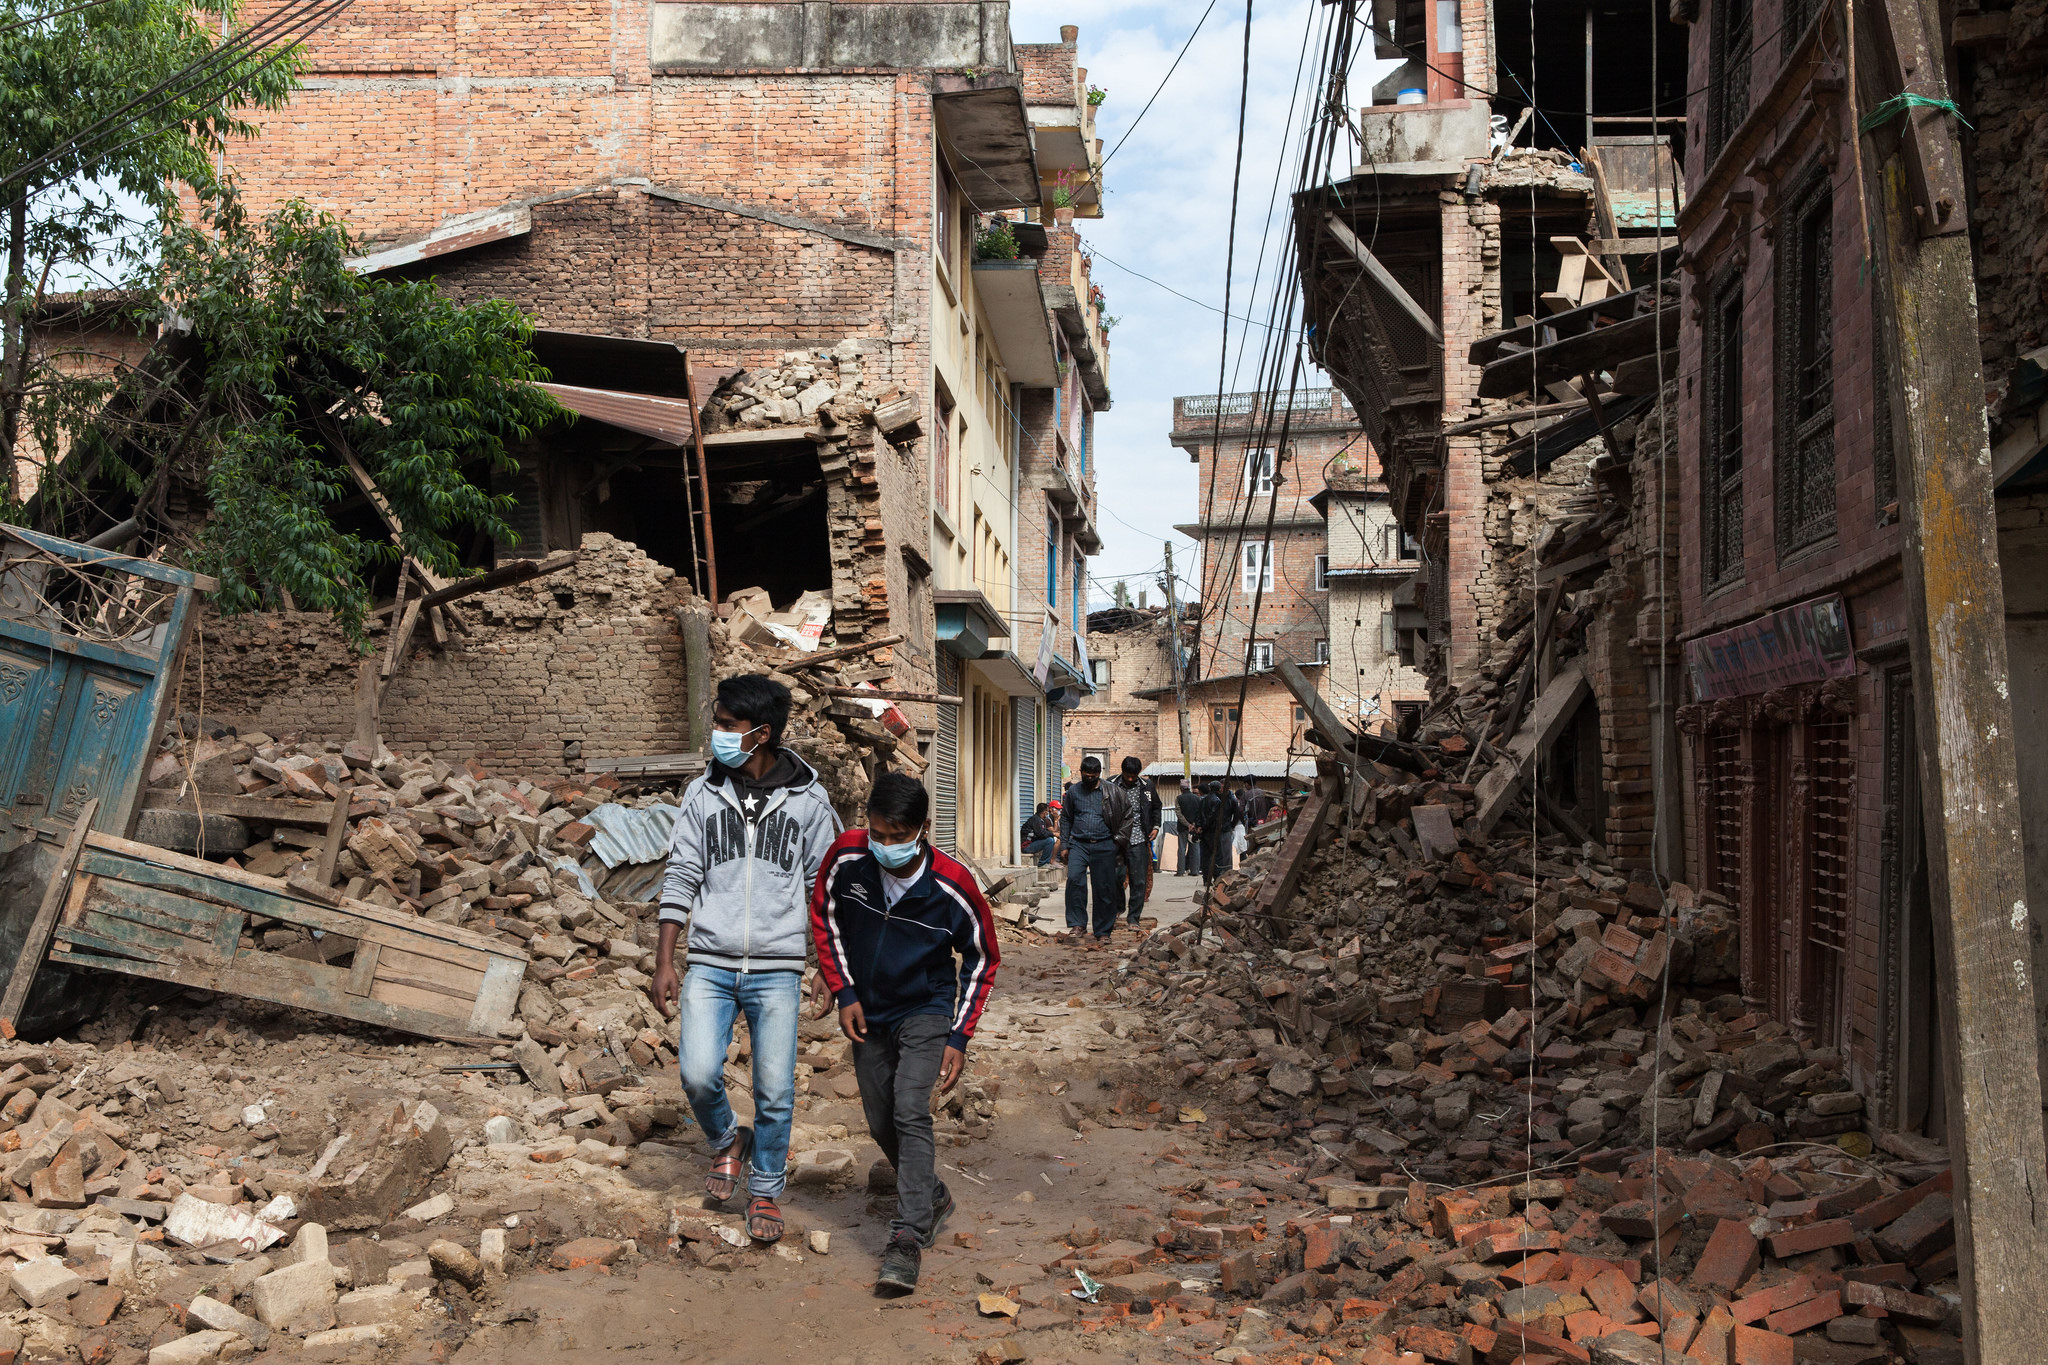 After Earthquake in Nepal, Bill Introduced to Grant Temporary Protected Status to Nepalese Nationals